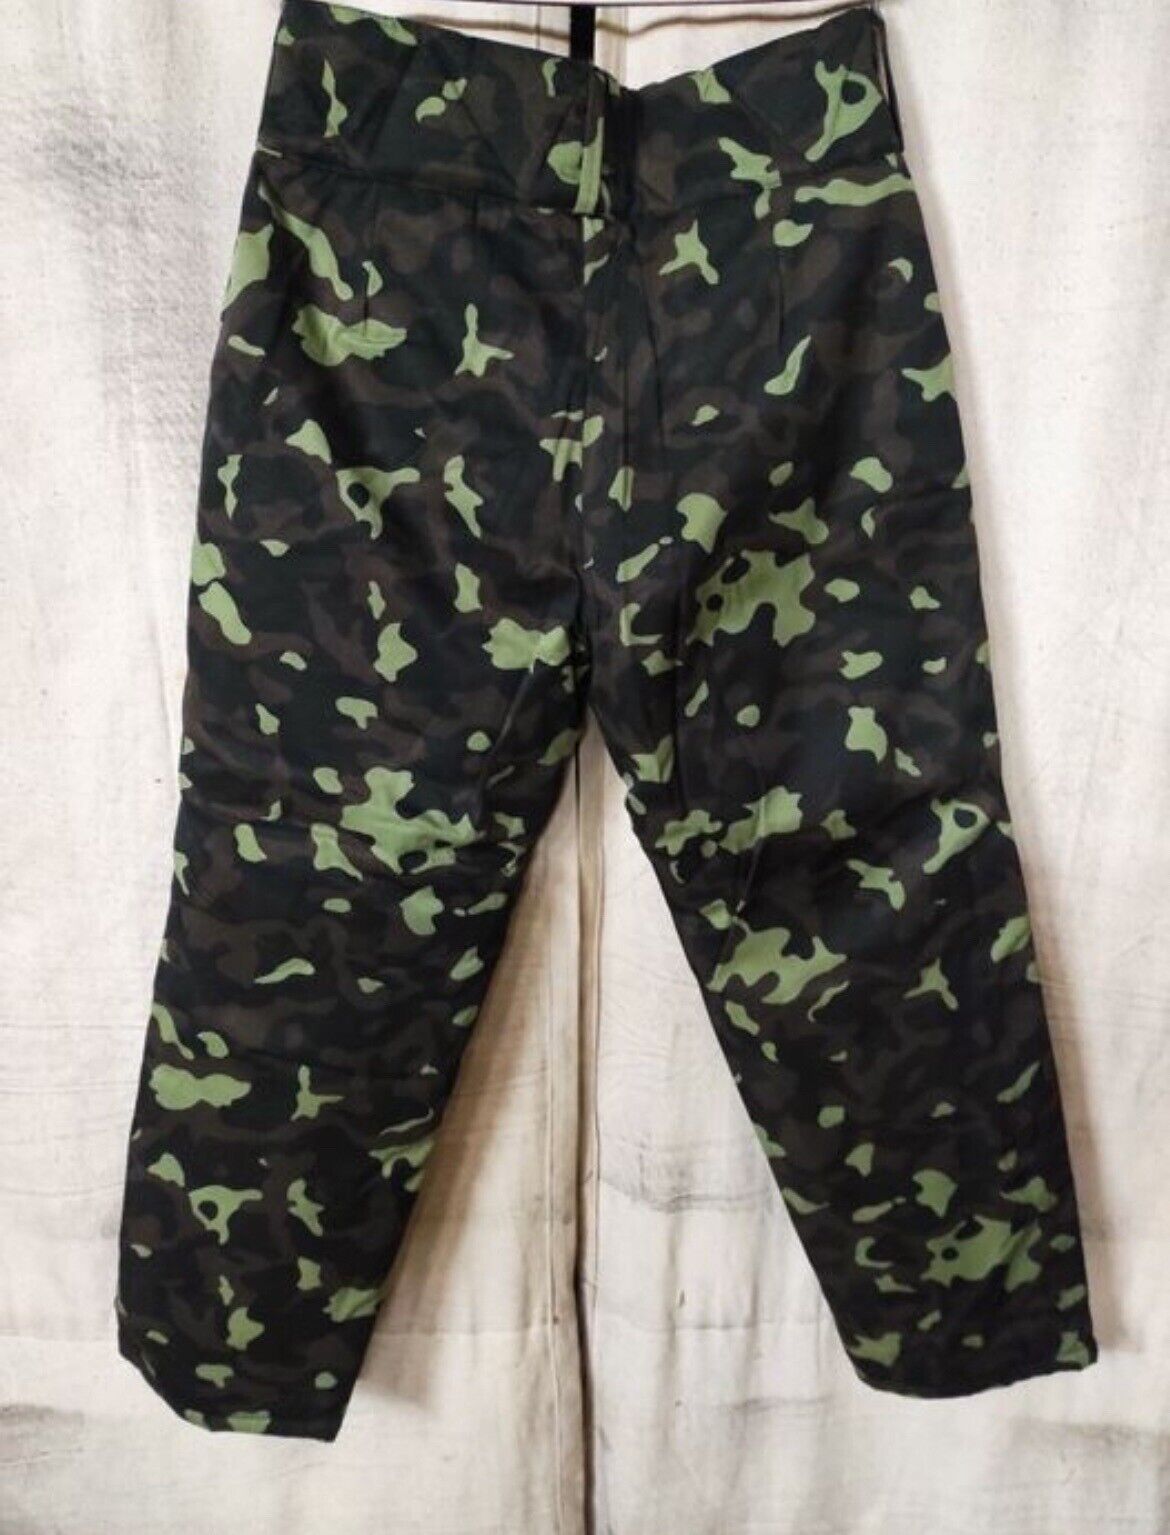 Soviet quilted Pants USSR Camouflage Greta Size XL-2XL